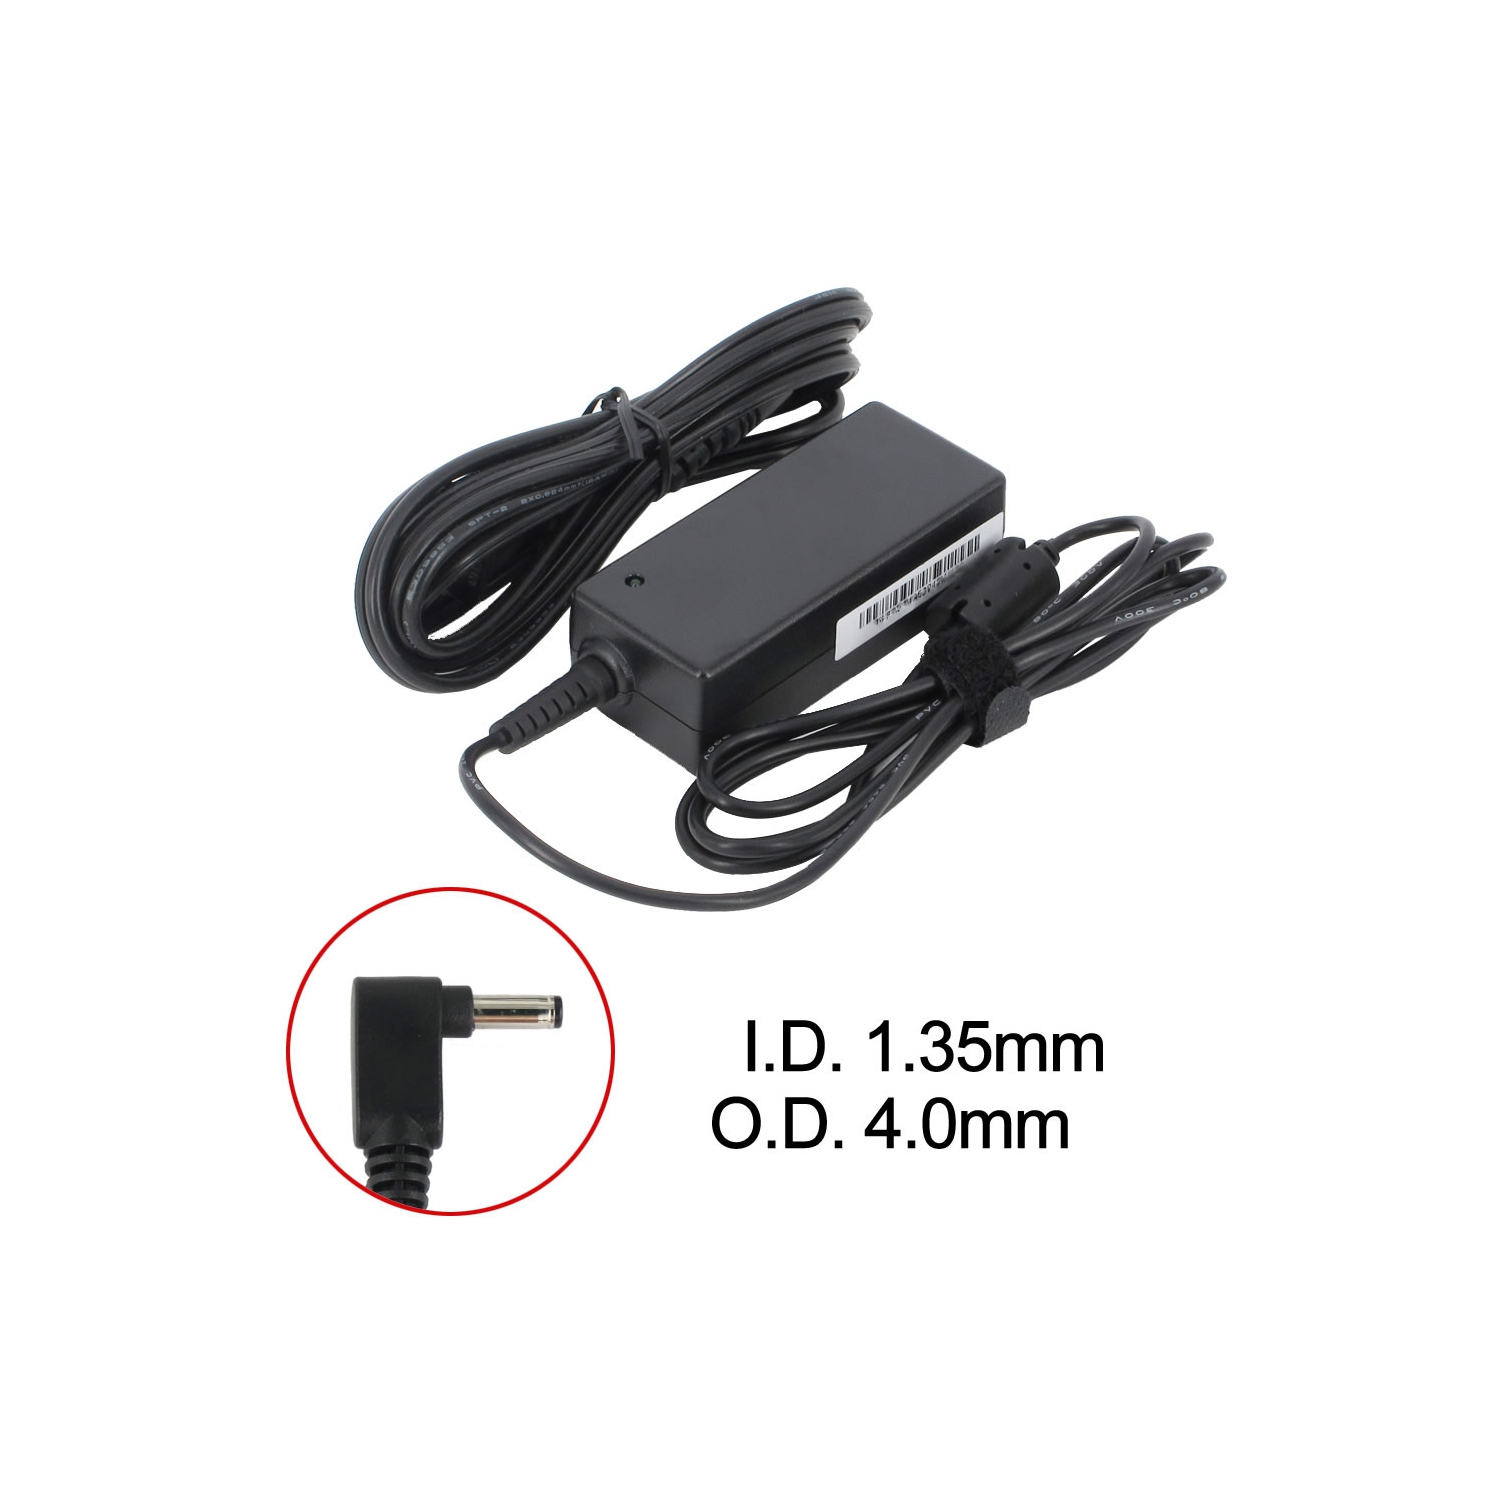 BattDepot: New Laptop AC Adapter for Asus Chromebook 13 C300MA, 0A001-00230300, 0A001-00233100, EXA1206CH, W15-065N1A